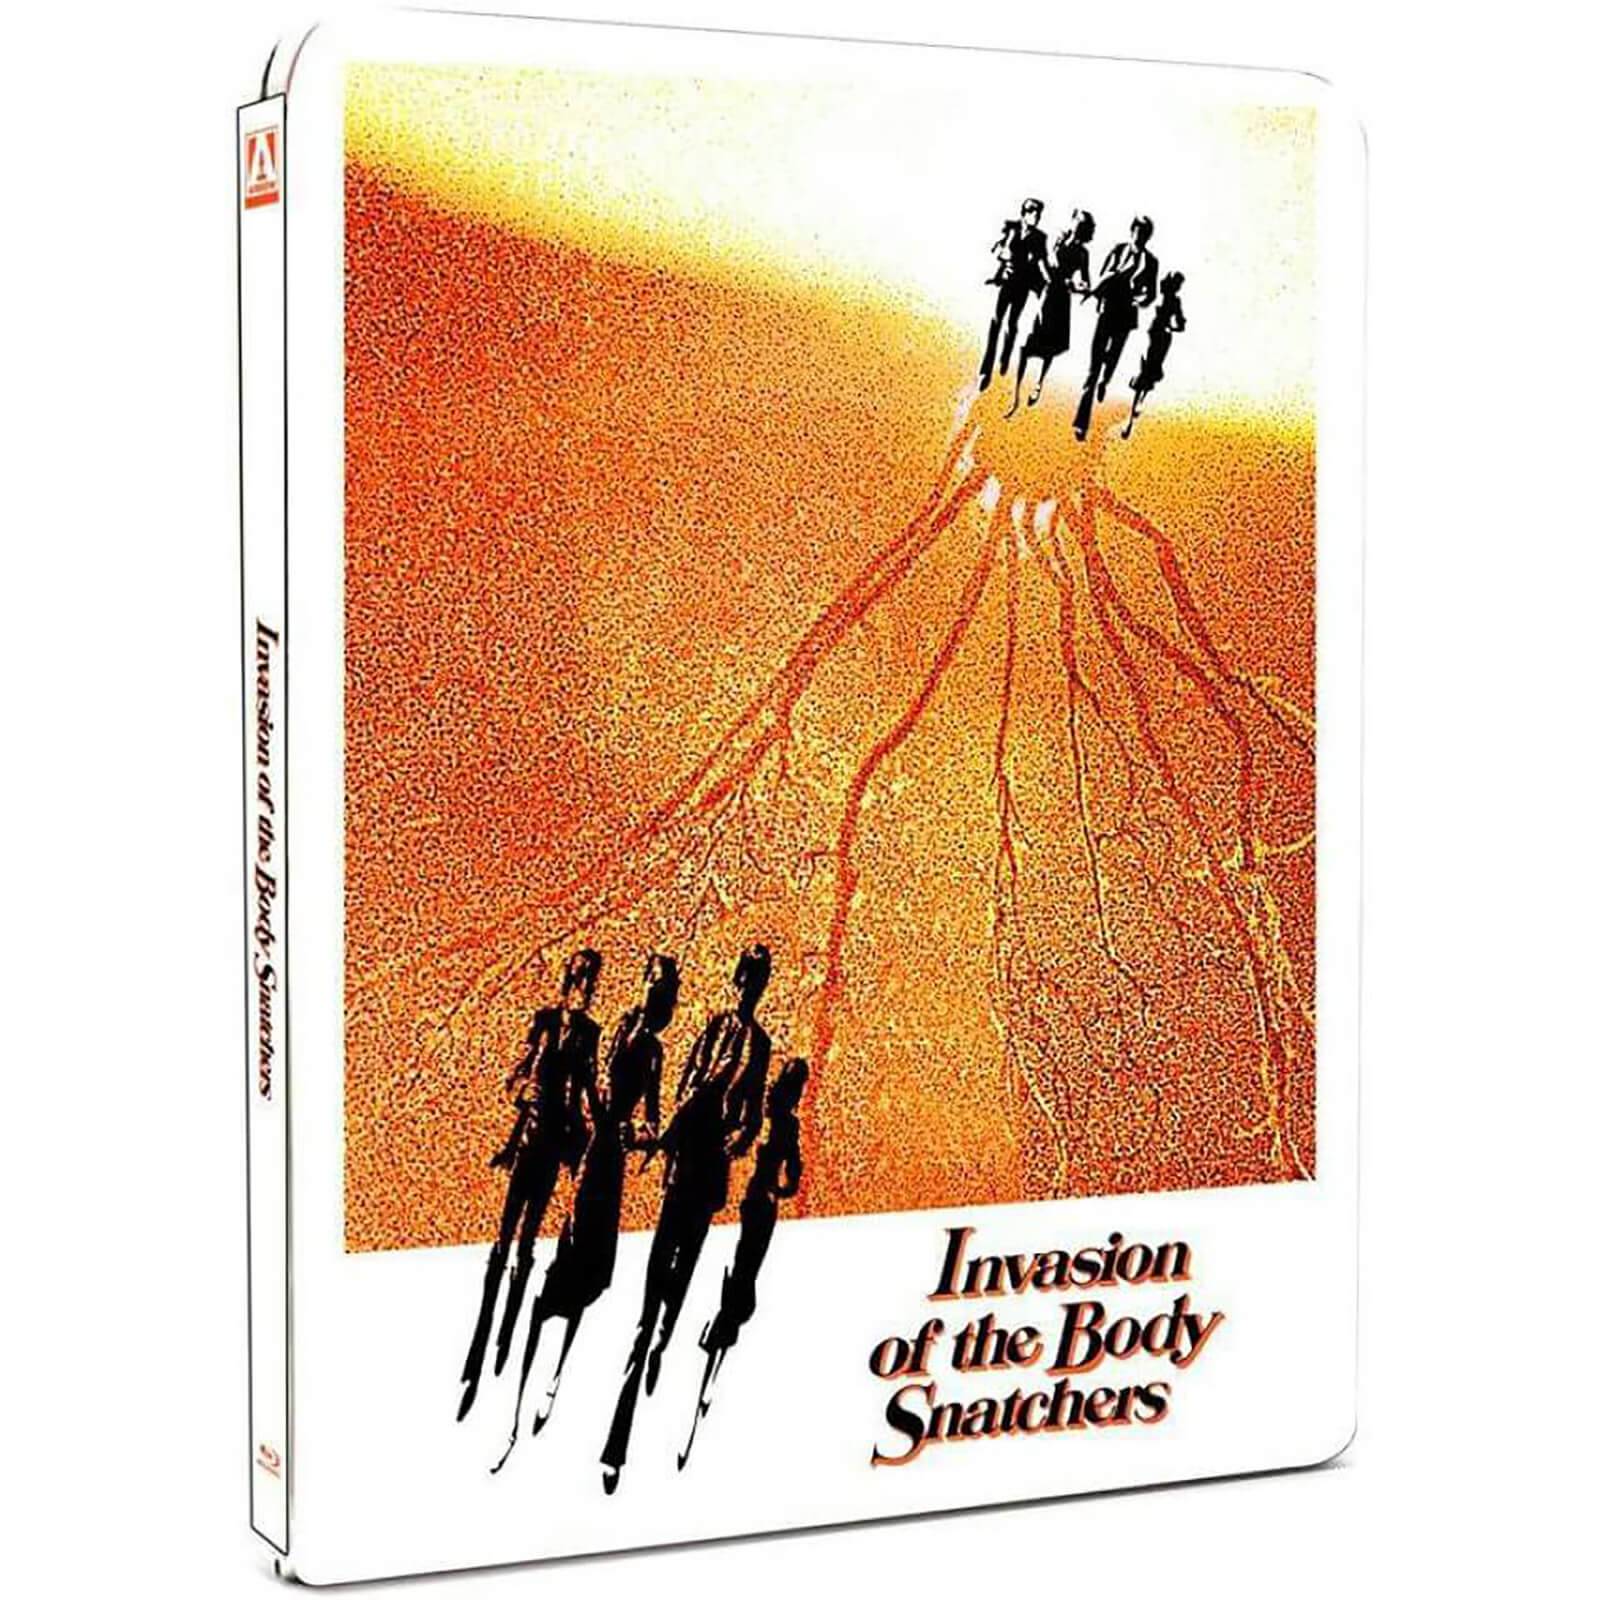 Invasion of the Body Snatchers - Limited Edition Steelbook